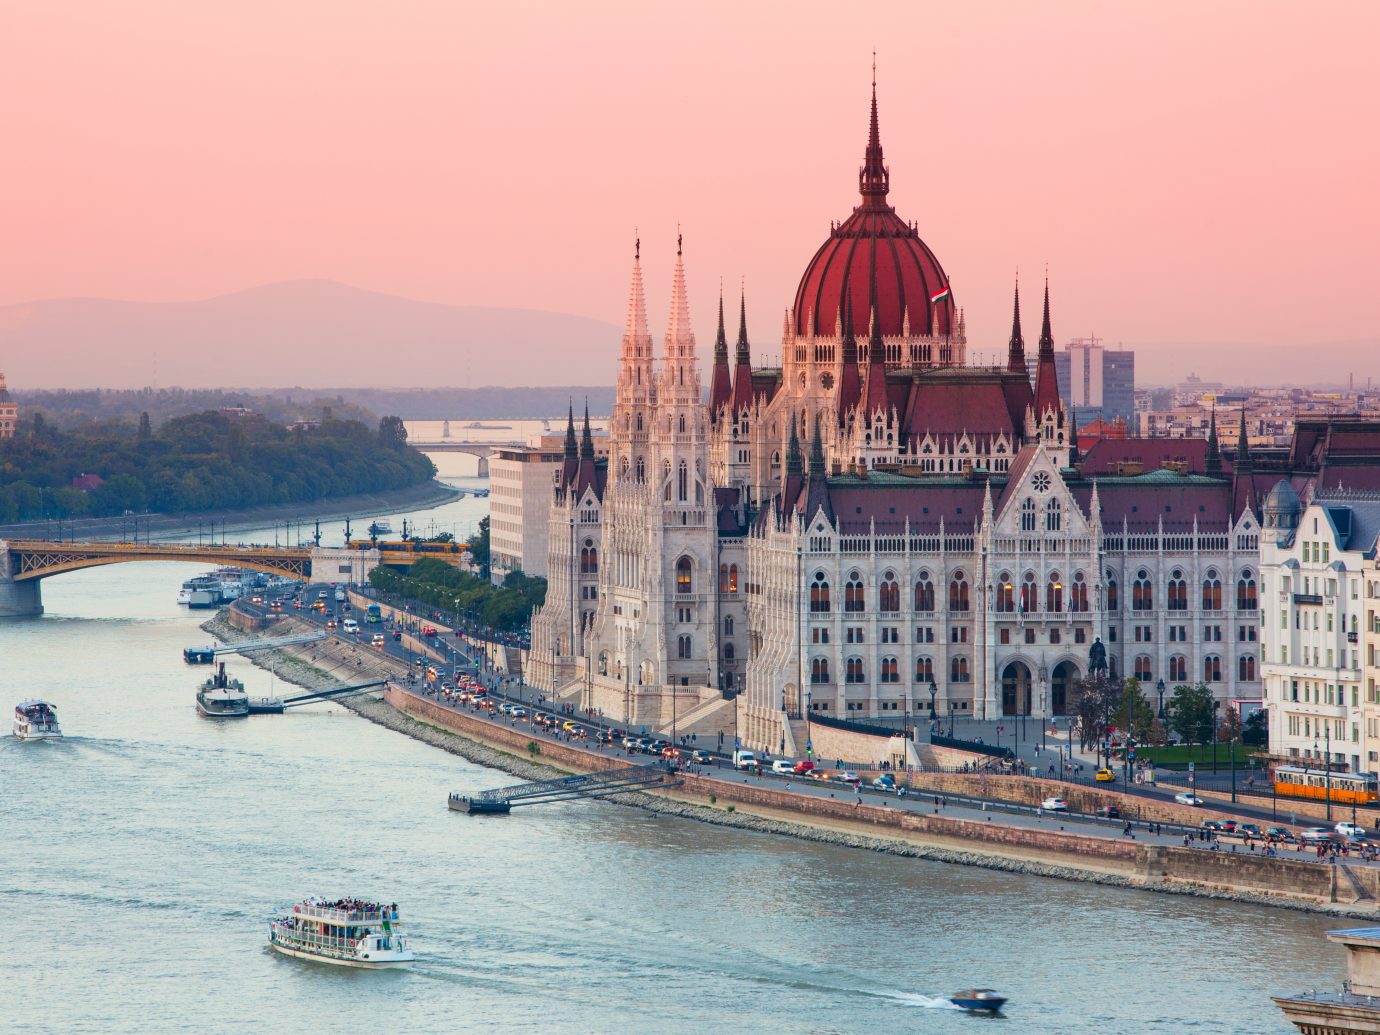 Hungarian parliament in sunset.